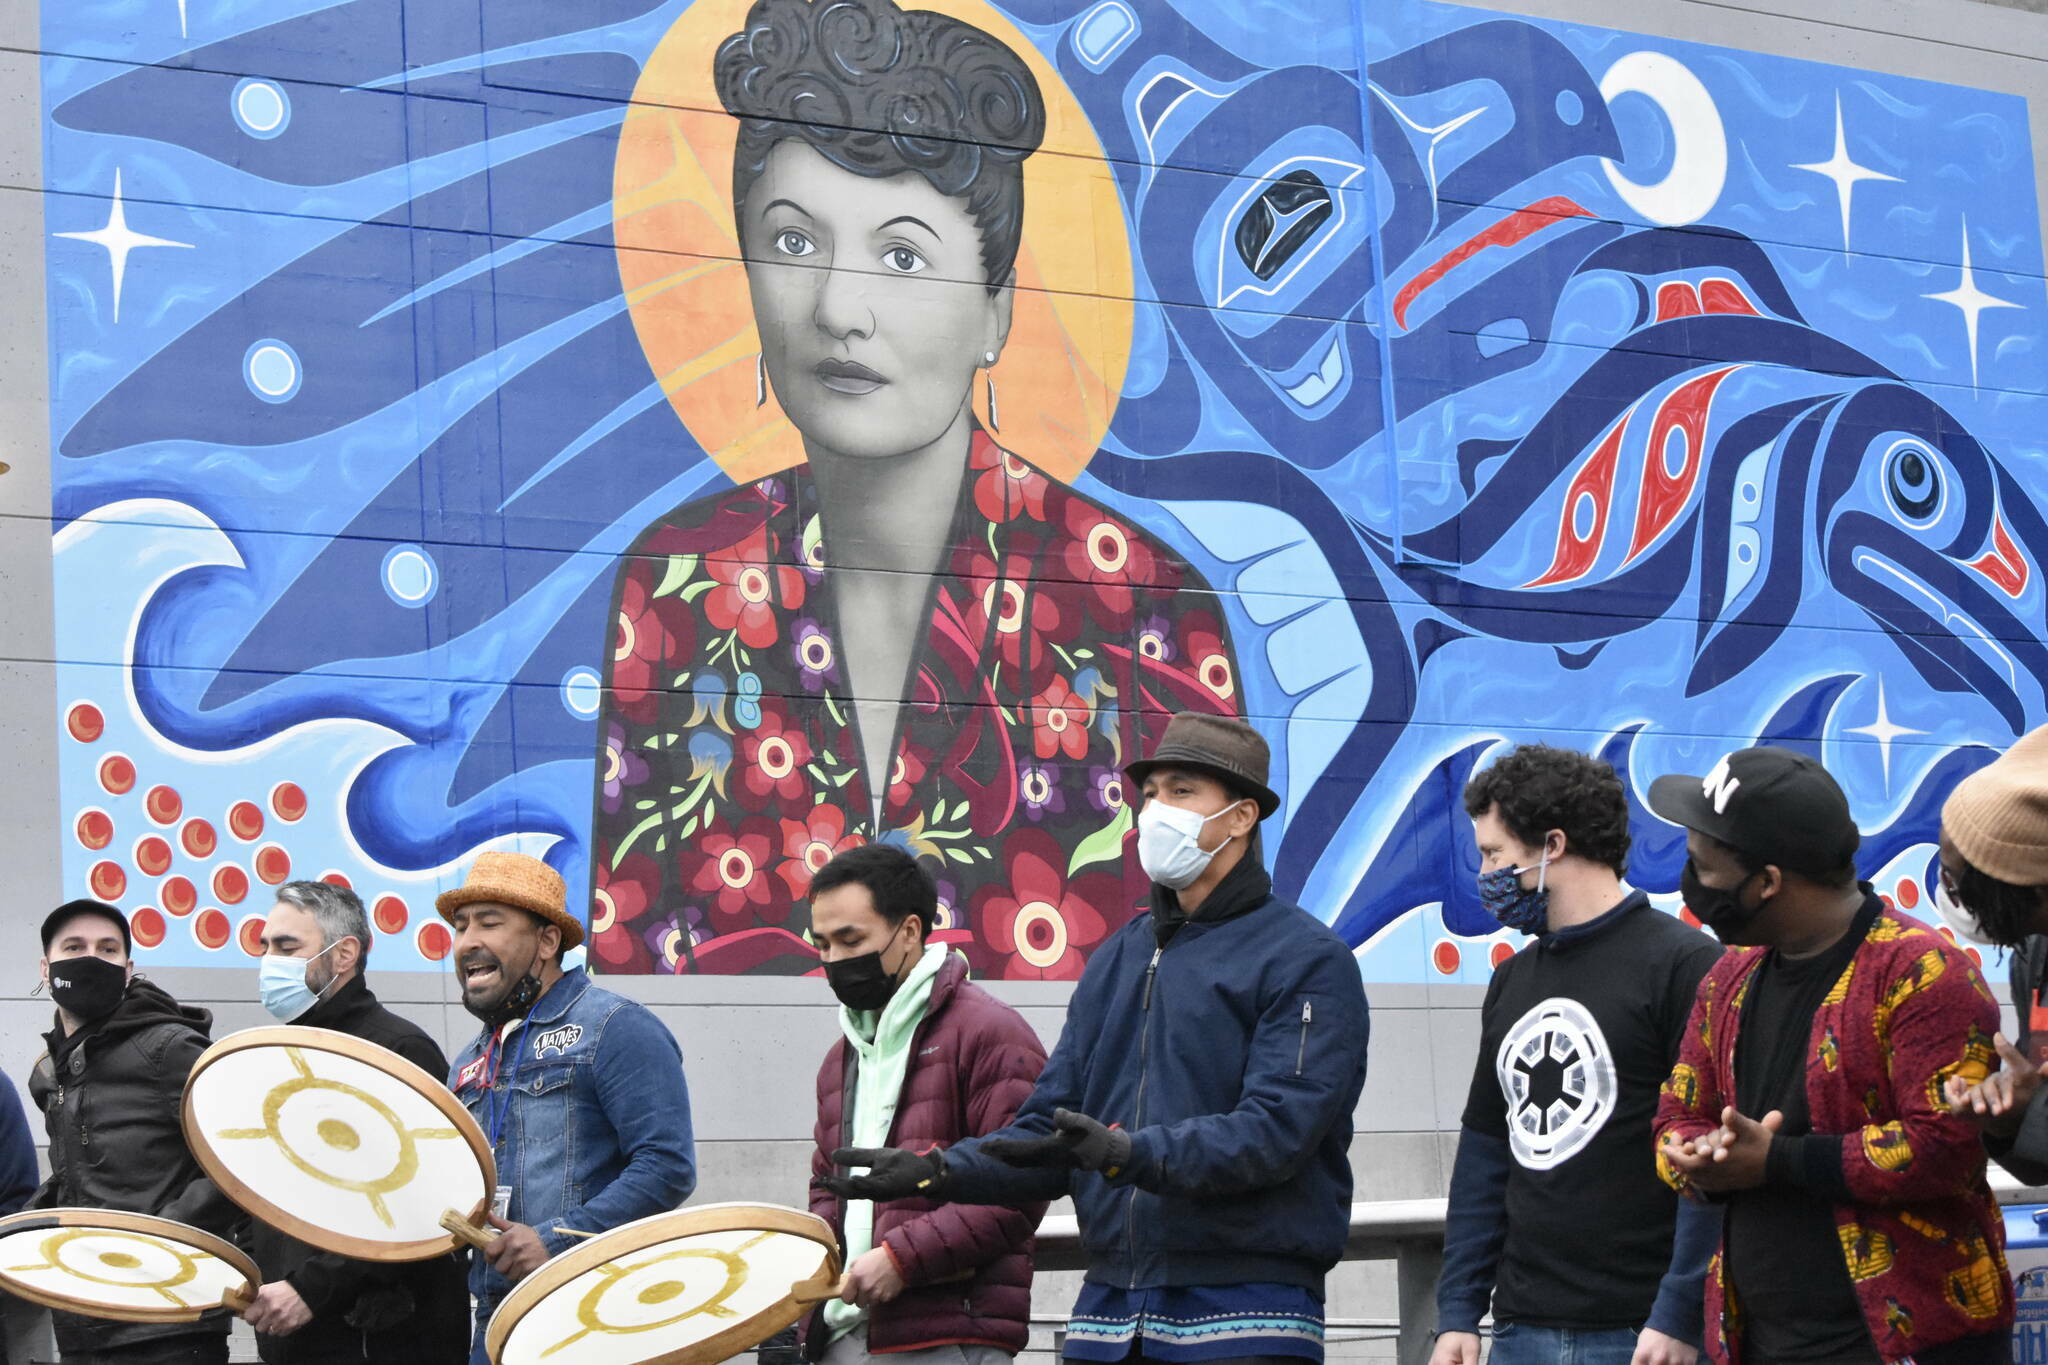 Artists with the inaugural Áak’w Rock Festival gather beneath the mural of Elizabeth Peratrovich on the Juneau waterfront on Friday, Nov. 5, 2021. That festival was virtual that year due to the COVID-19 pandemic, but organizers wanted to open the event in person. (Peter Segall / Juneau Empire File)